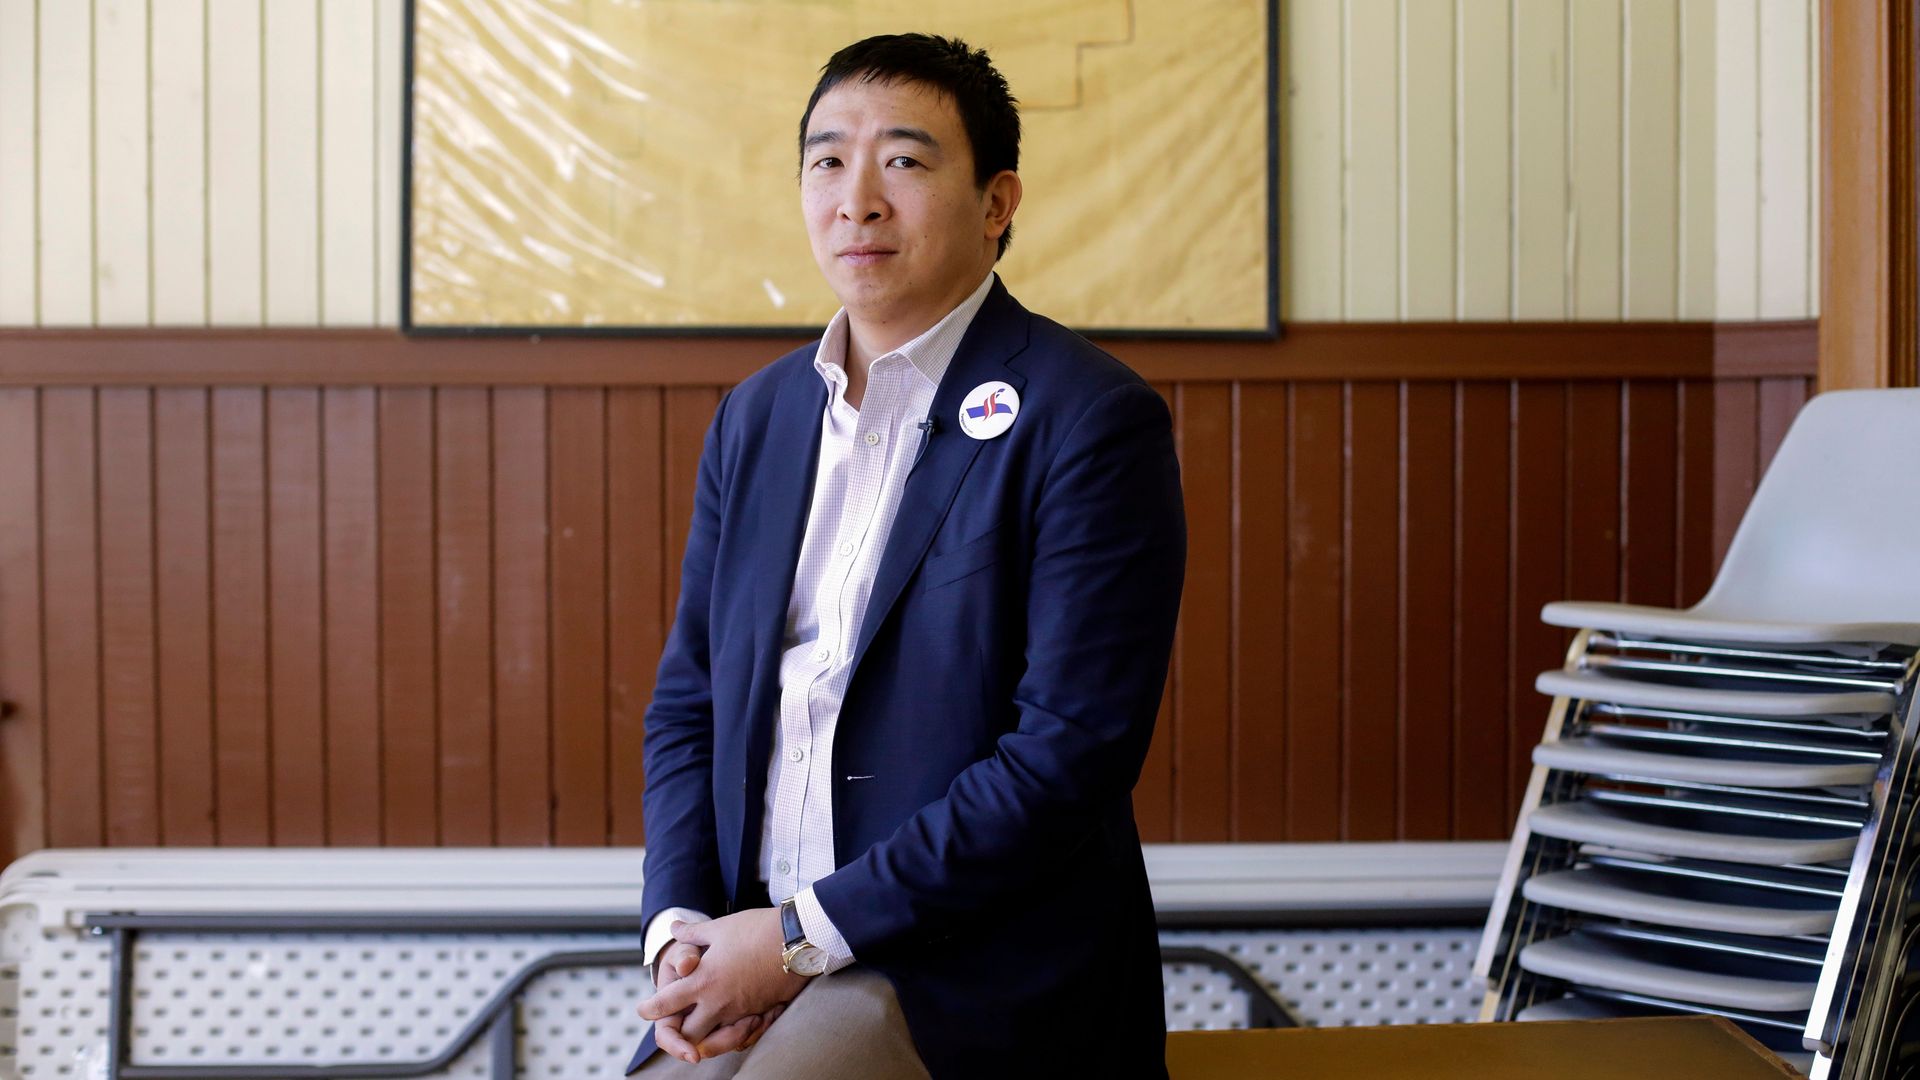 Democratic presidential candidate and businessman Andrew Yang